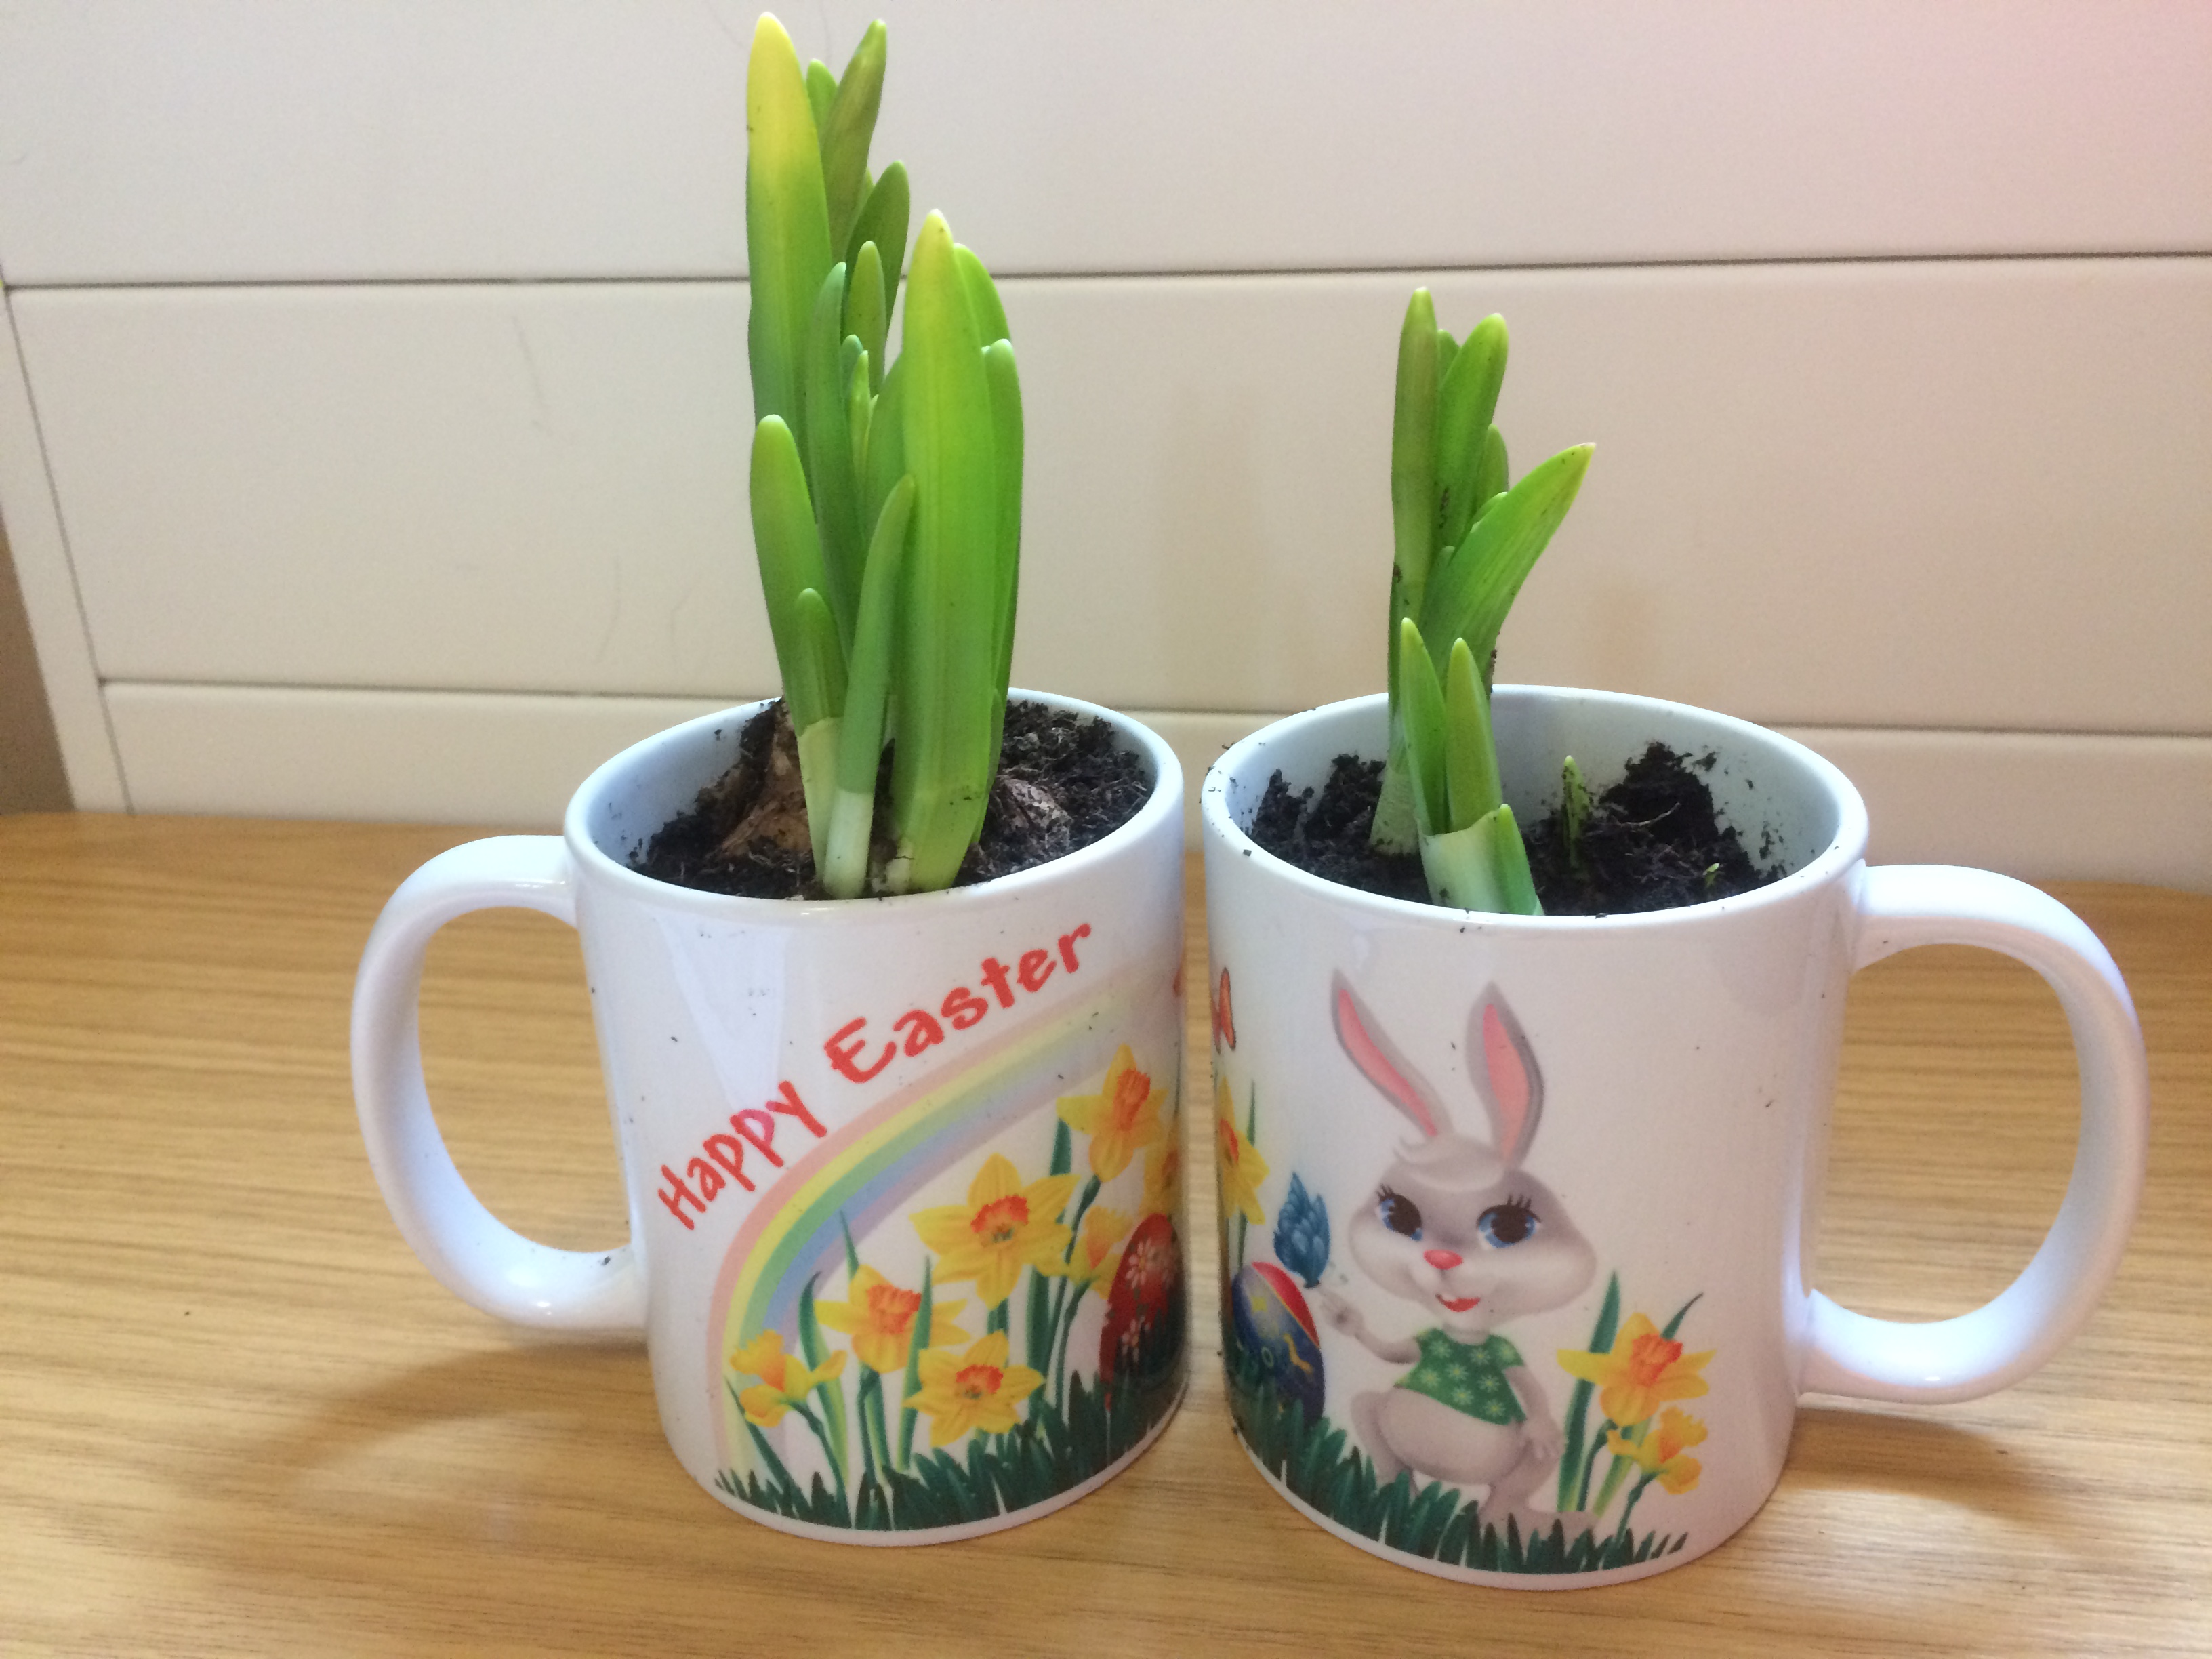 Easter at Four Seasons Care Centre: Key Healthcare is dedicated to caring for elderly residents in safe. We have multiple dementia care homes including our care home middlesbrough, our care home St. Helen and care home saltburn. We excel in monitoring and improving care levels.